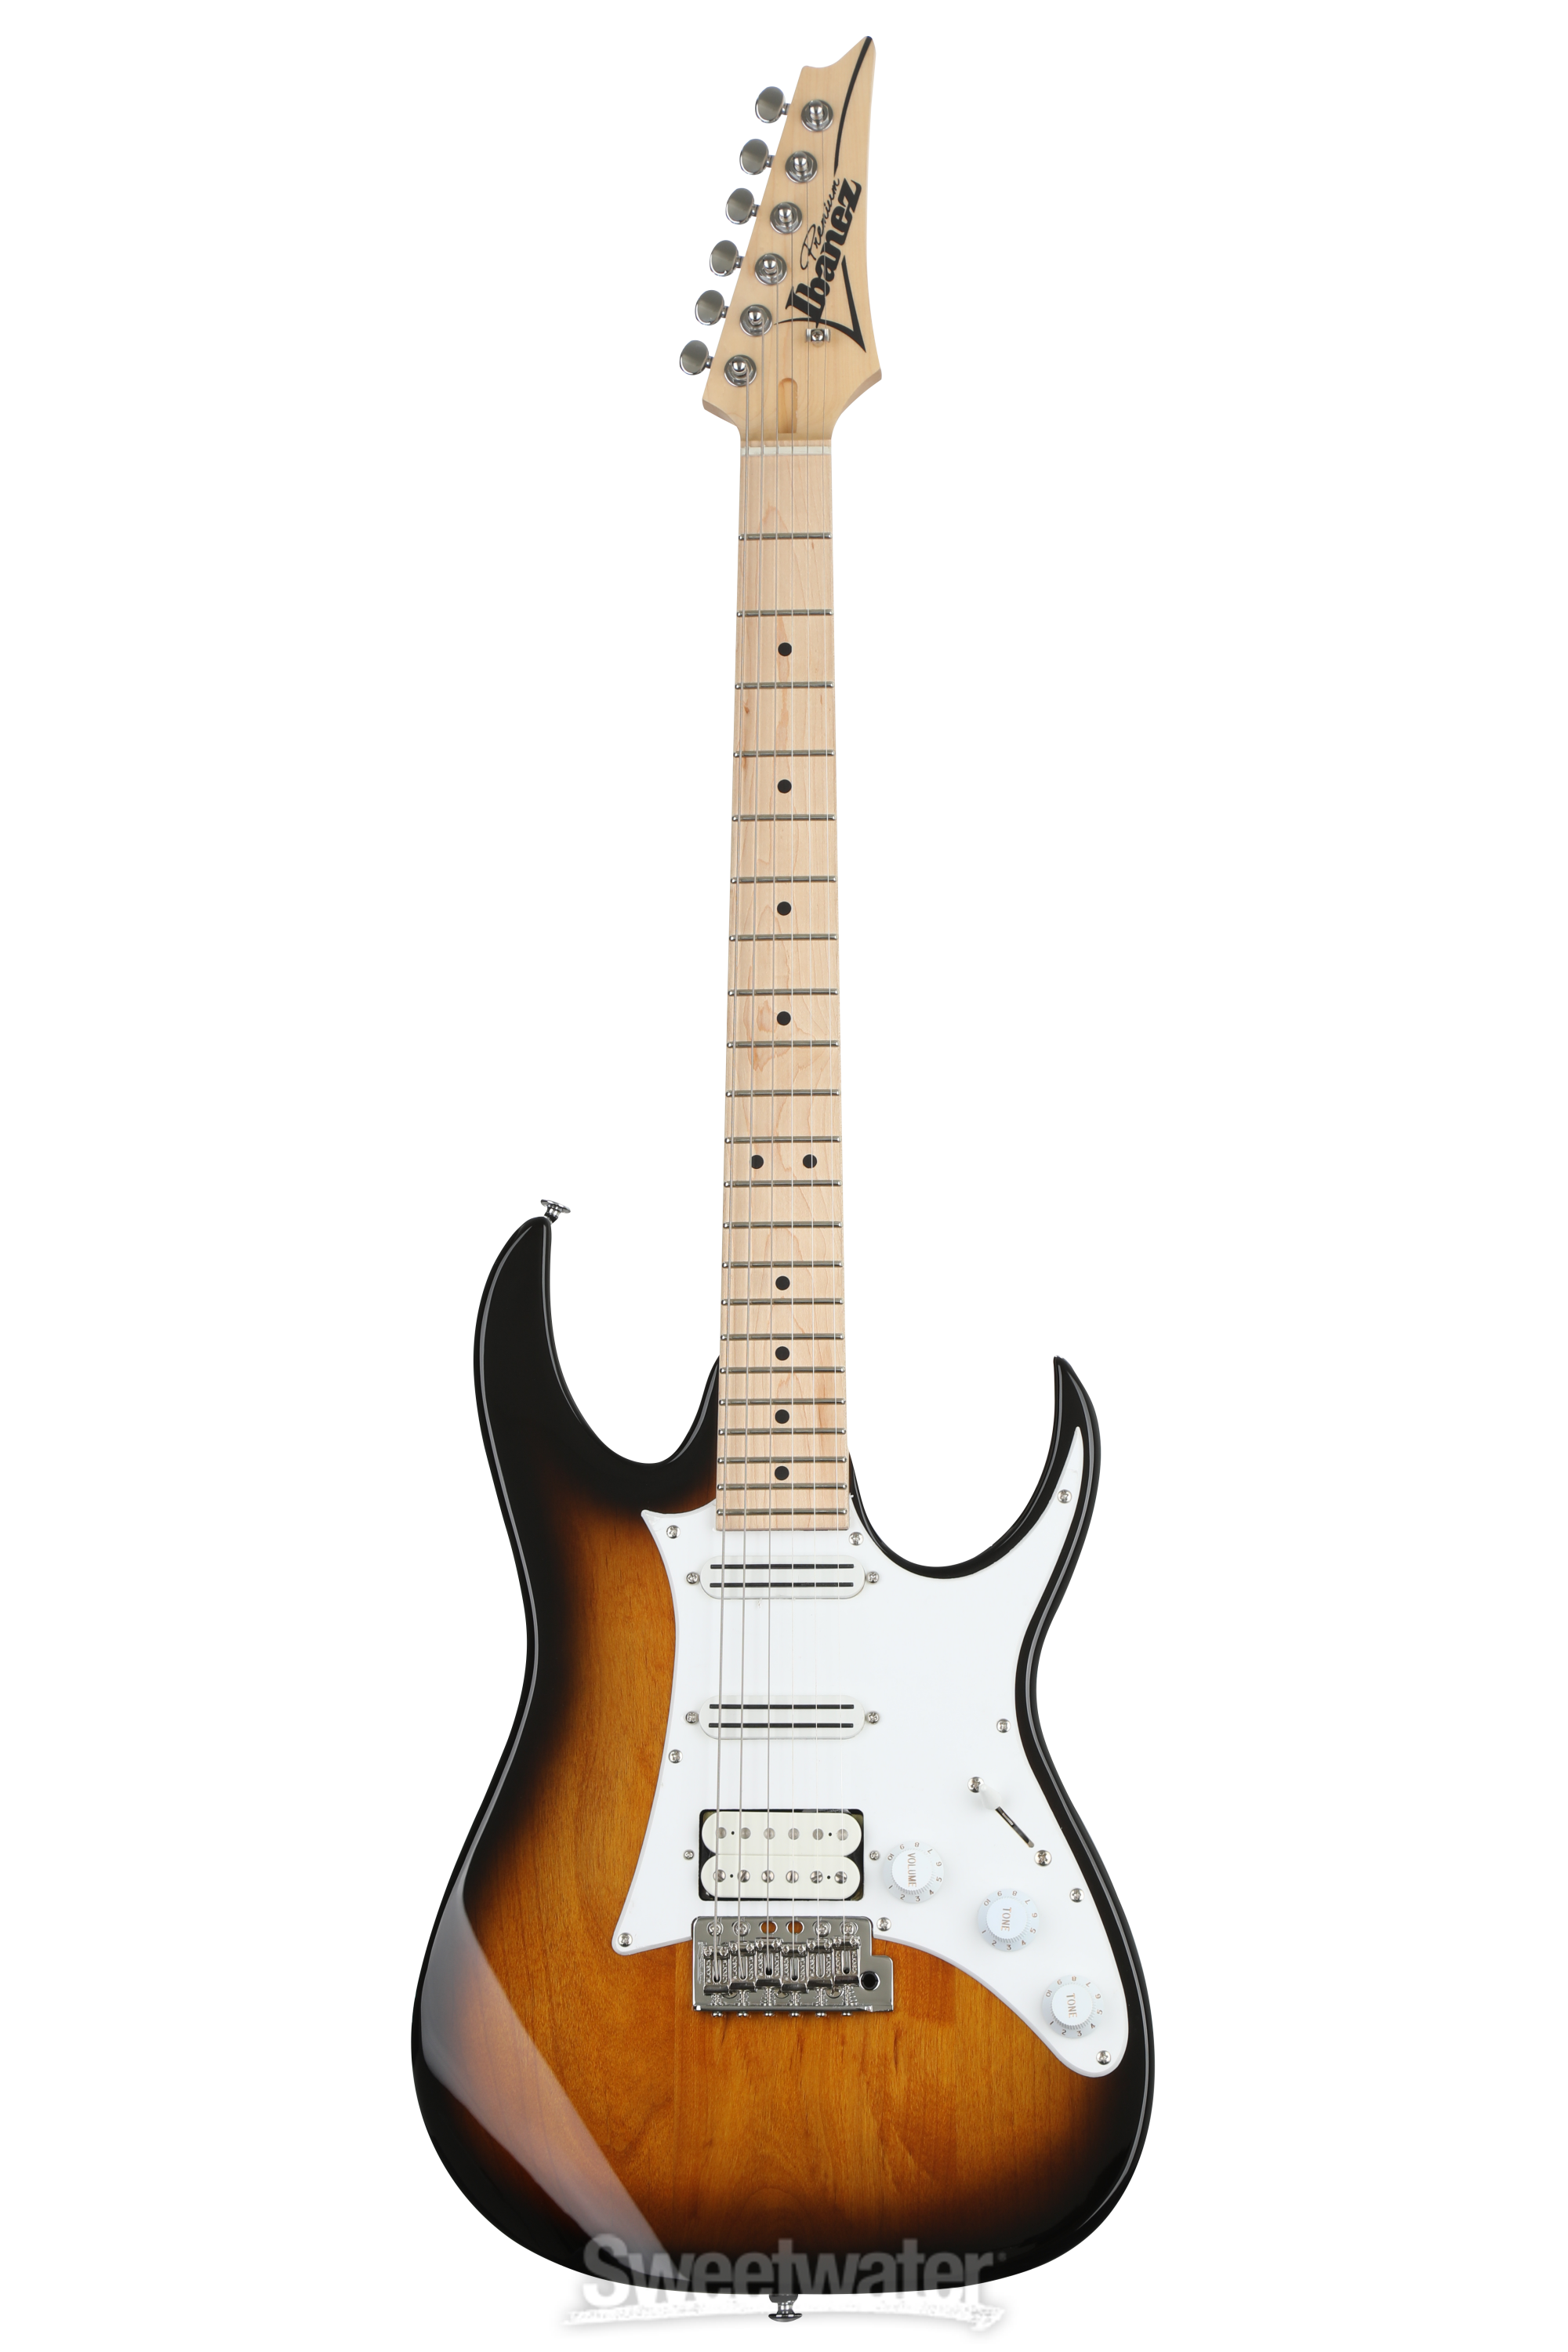 Ibanez Andy Timmons Signature ATP   Sunburst   Sweetwater